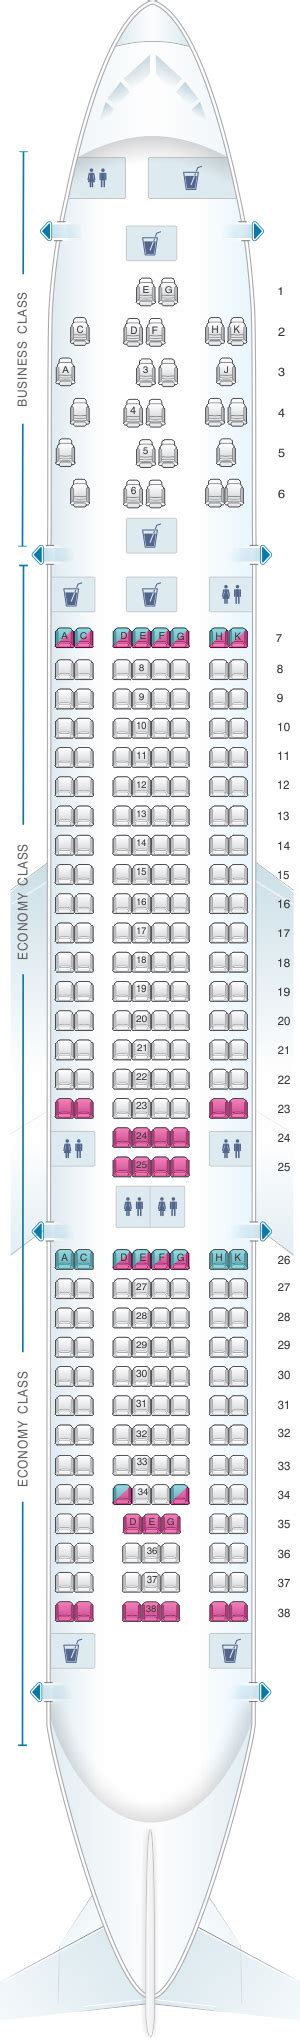 Turkish Airlines A Seat Map